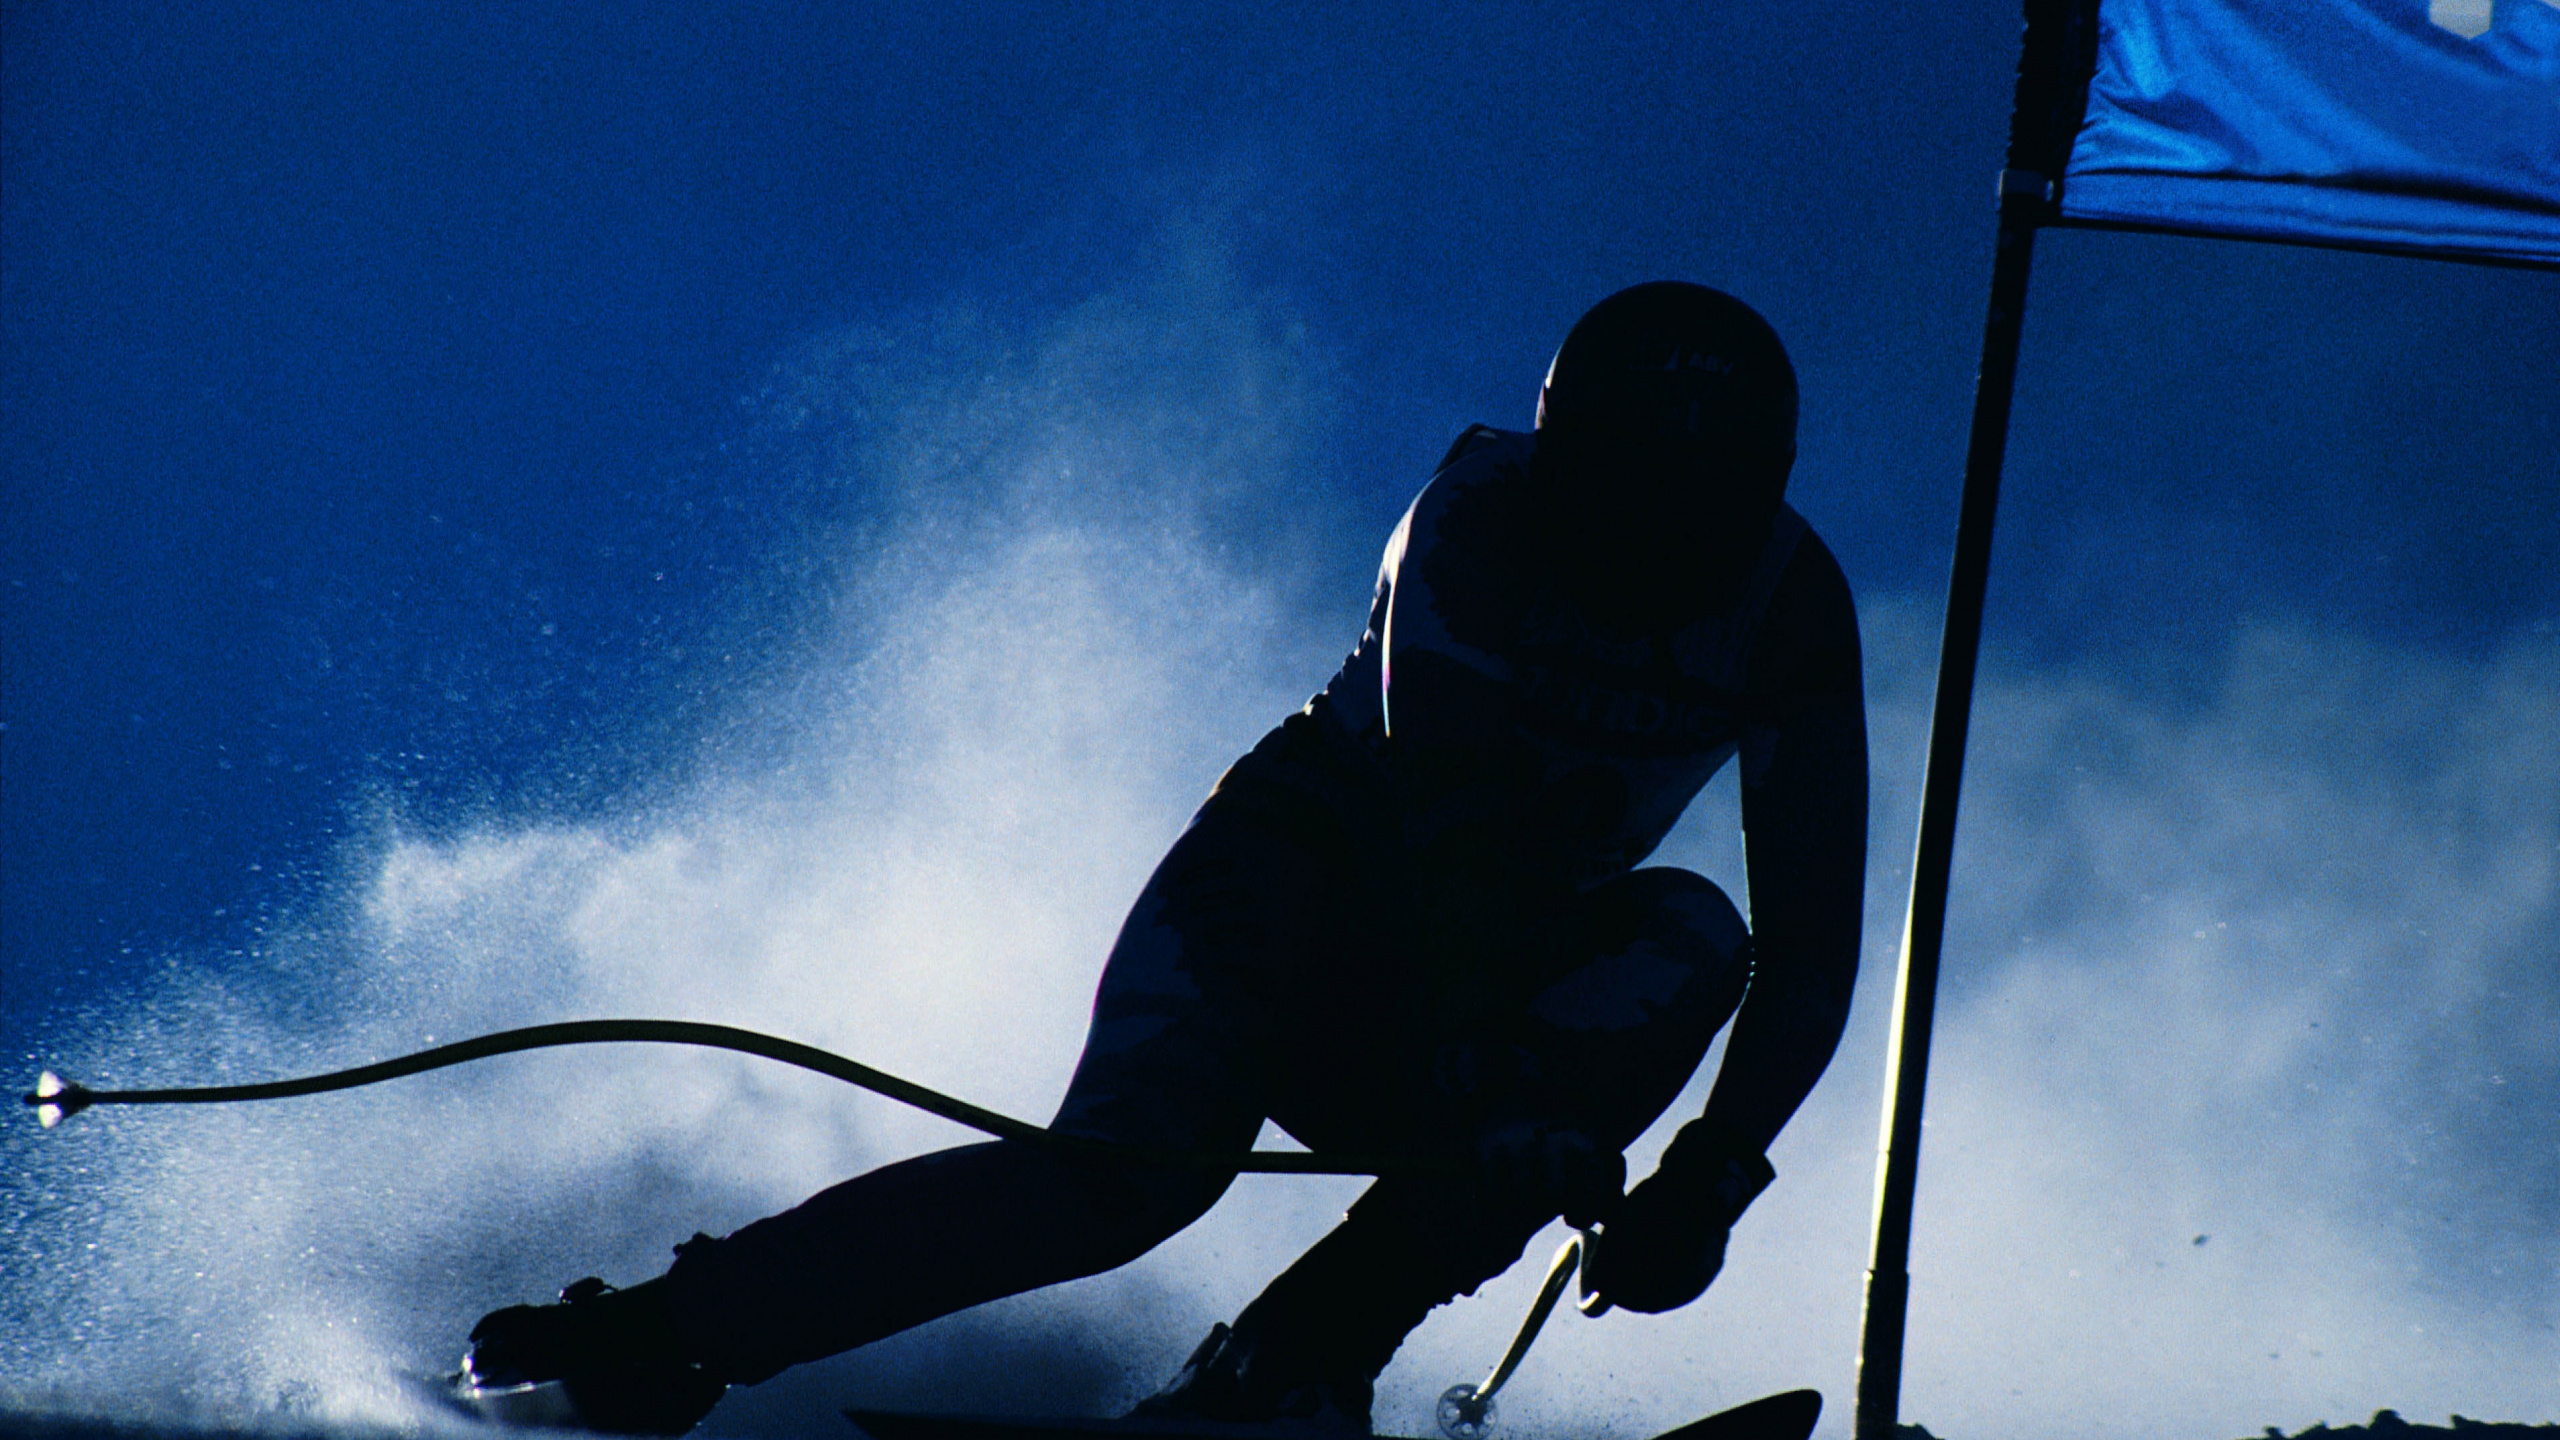 Silhouette of Man Riding Ski Blades Under Blue Sky. Wallpaper in 2560x1440 Resolution